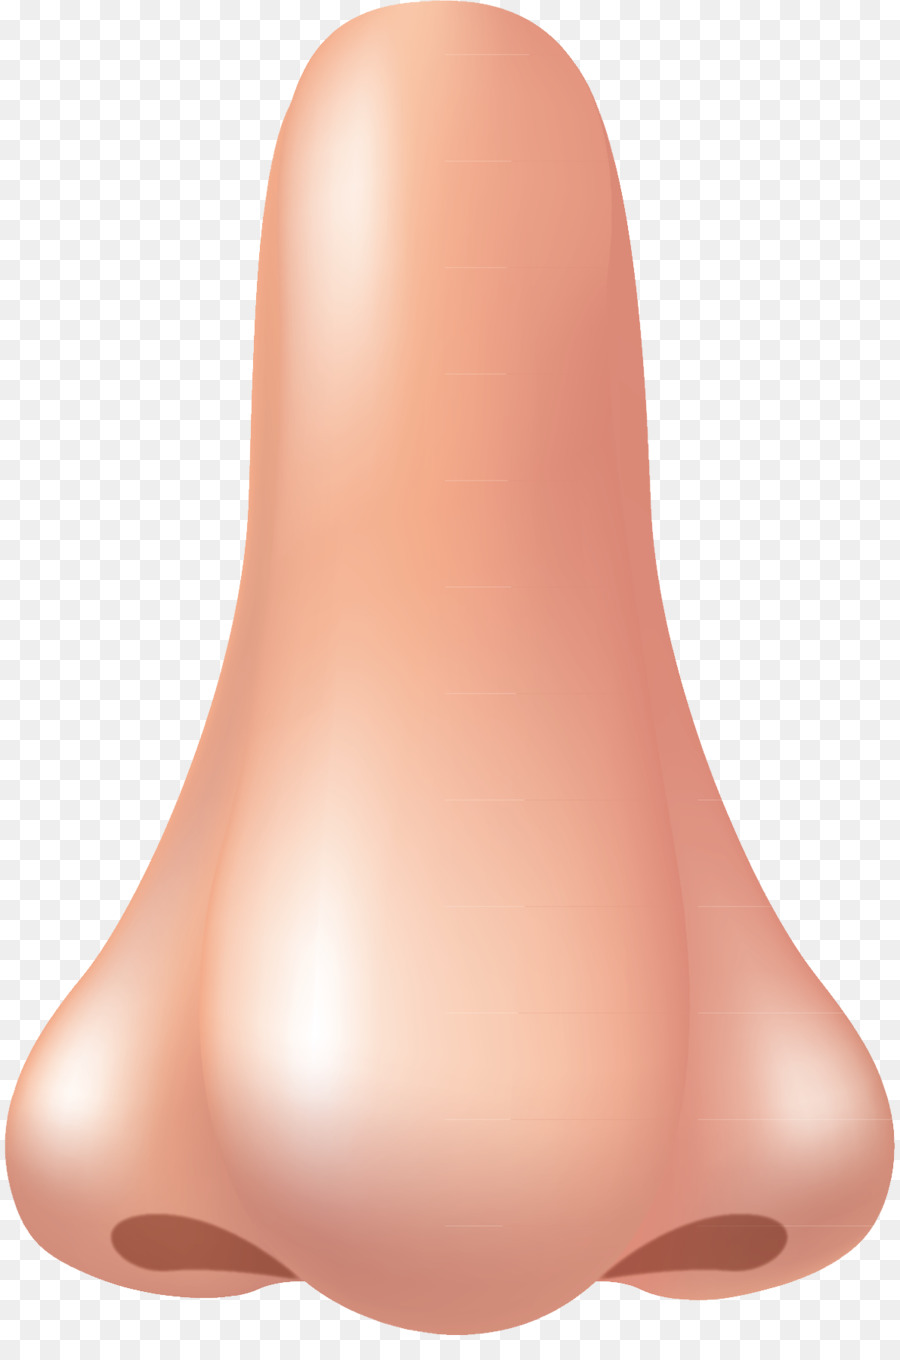 Nose png clipart.